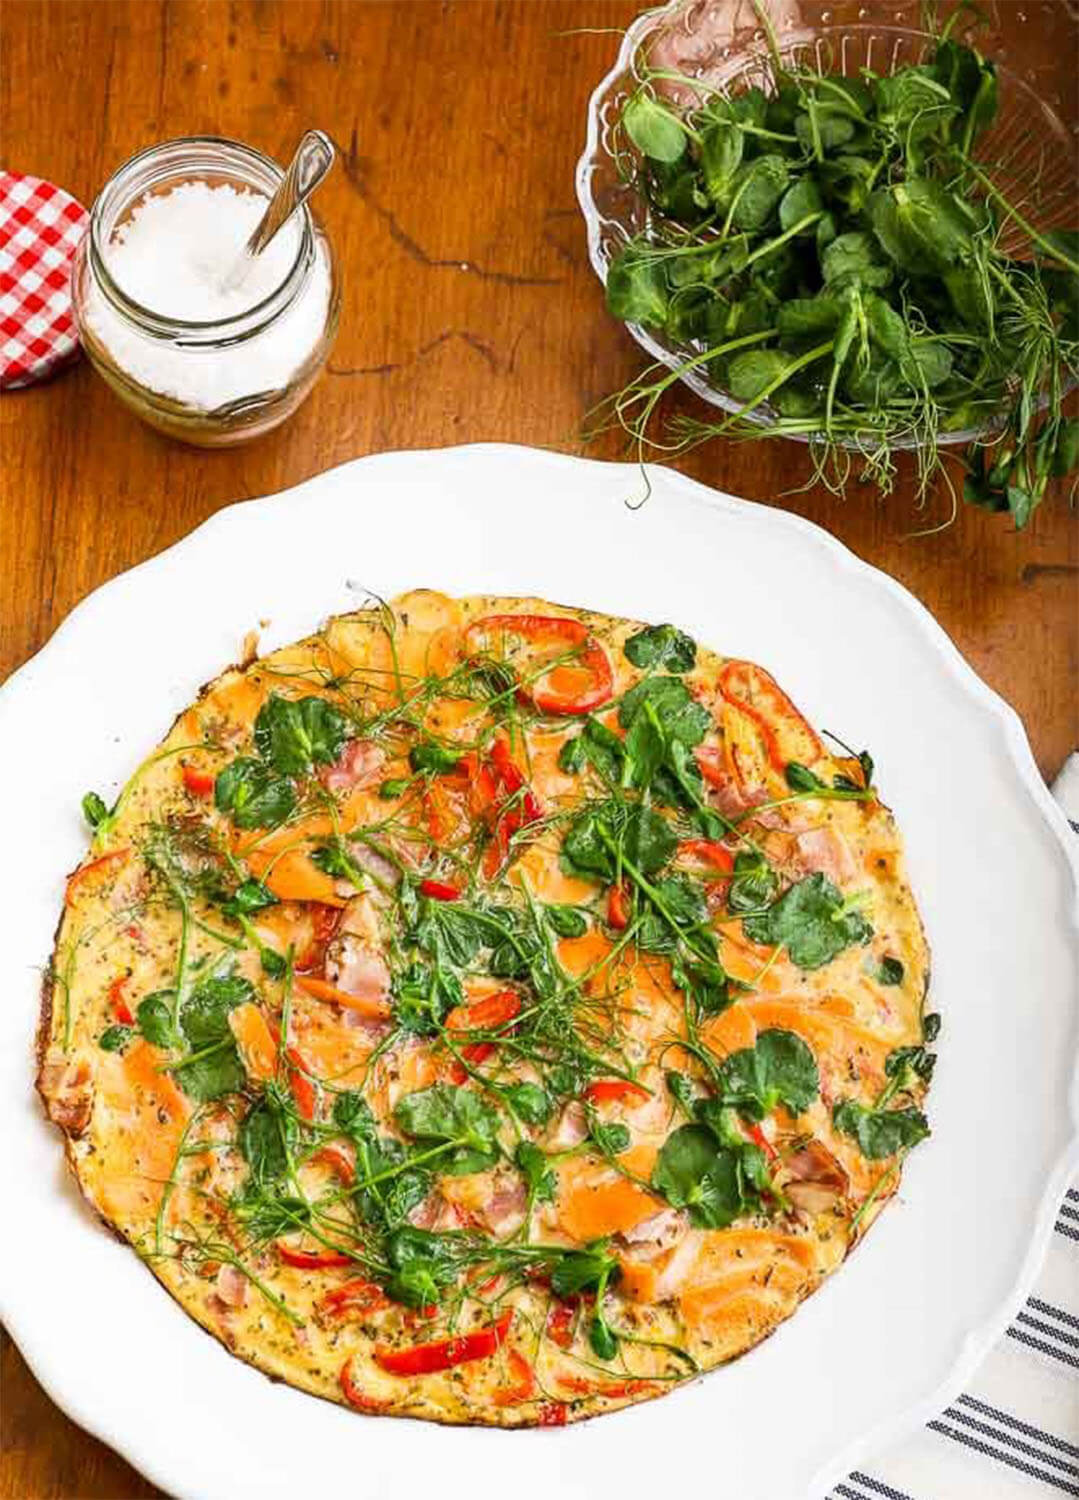 VEGETABLE OMELET WITH PEA SHOOTS